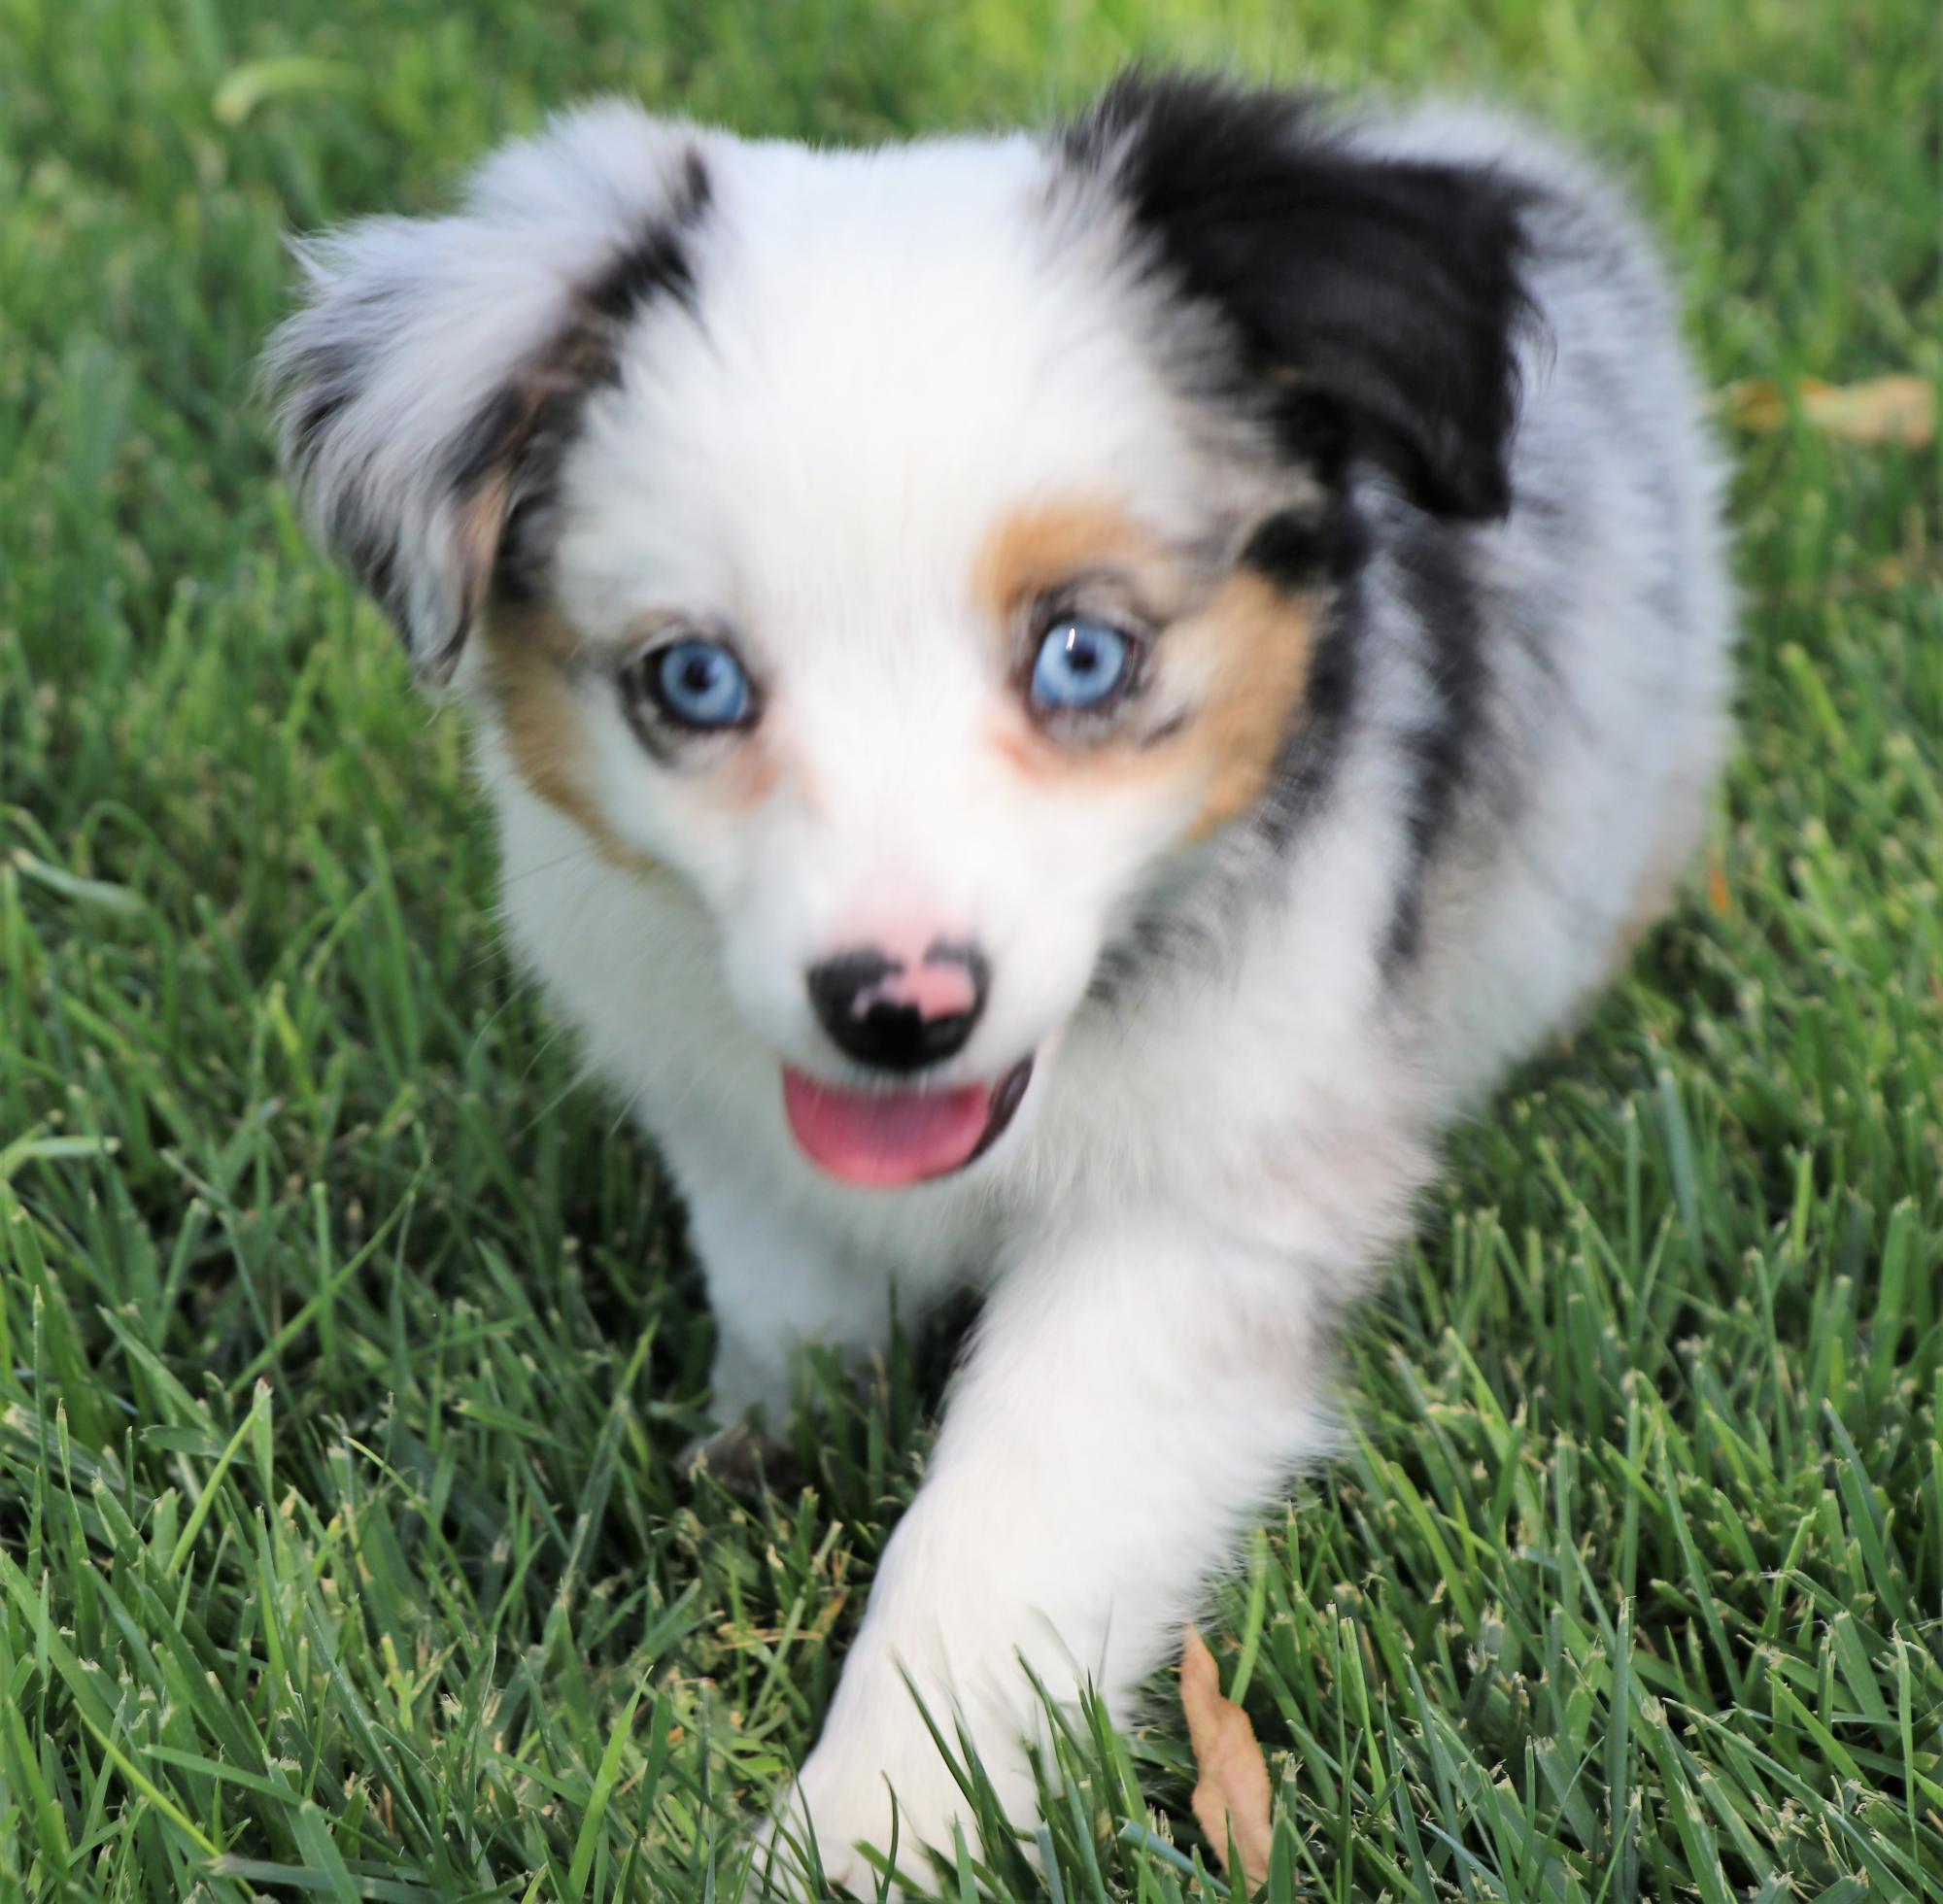 Toy Australian Shepherd puppies for sale in CO, Toy Aussie puppies in CO,